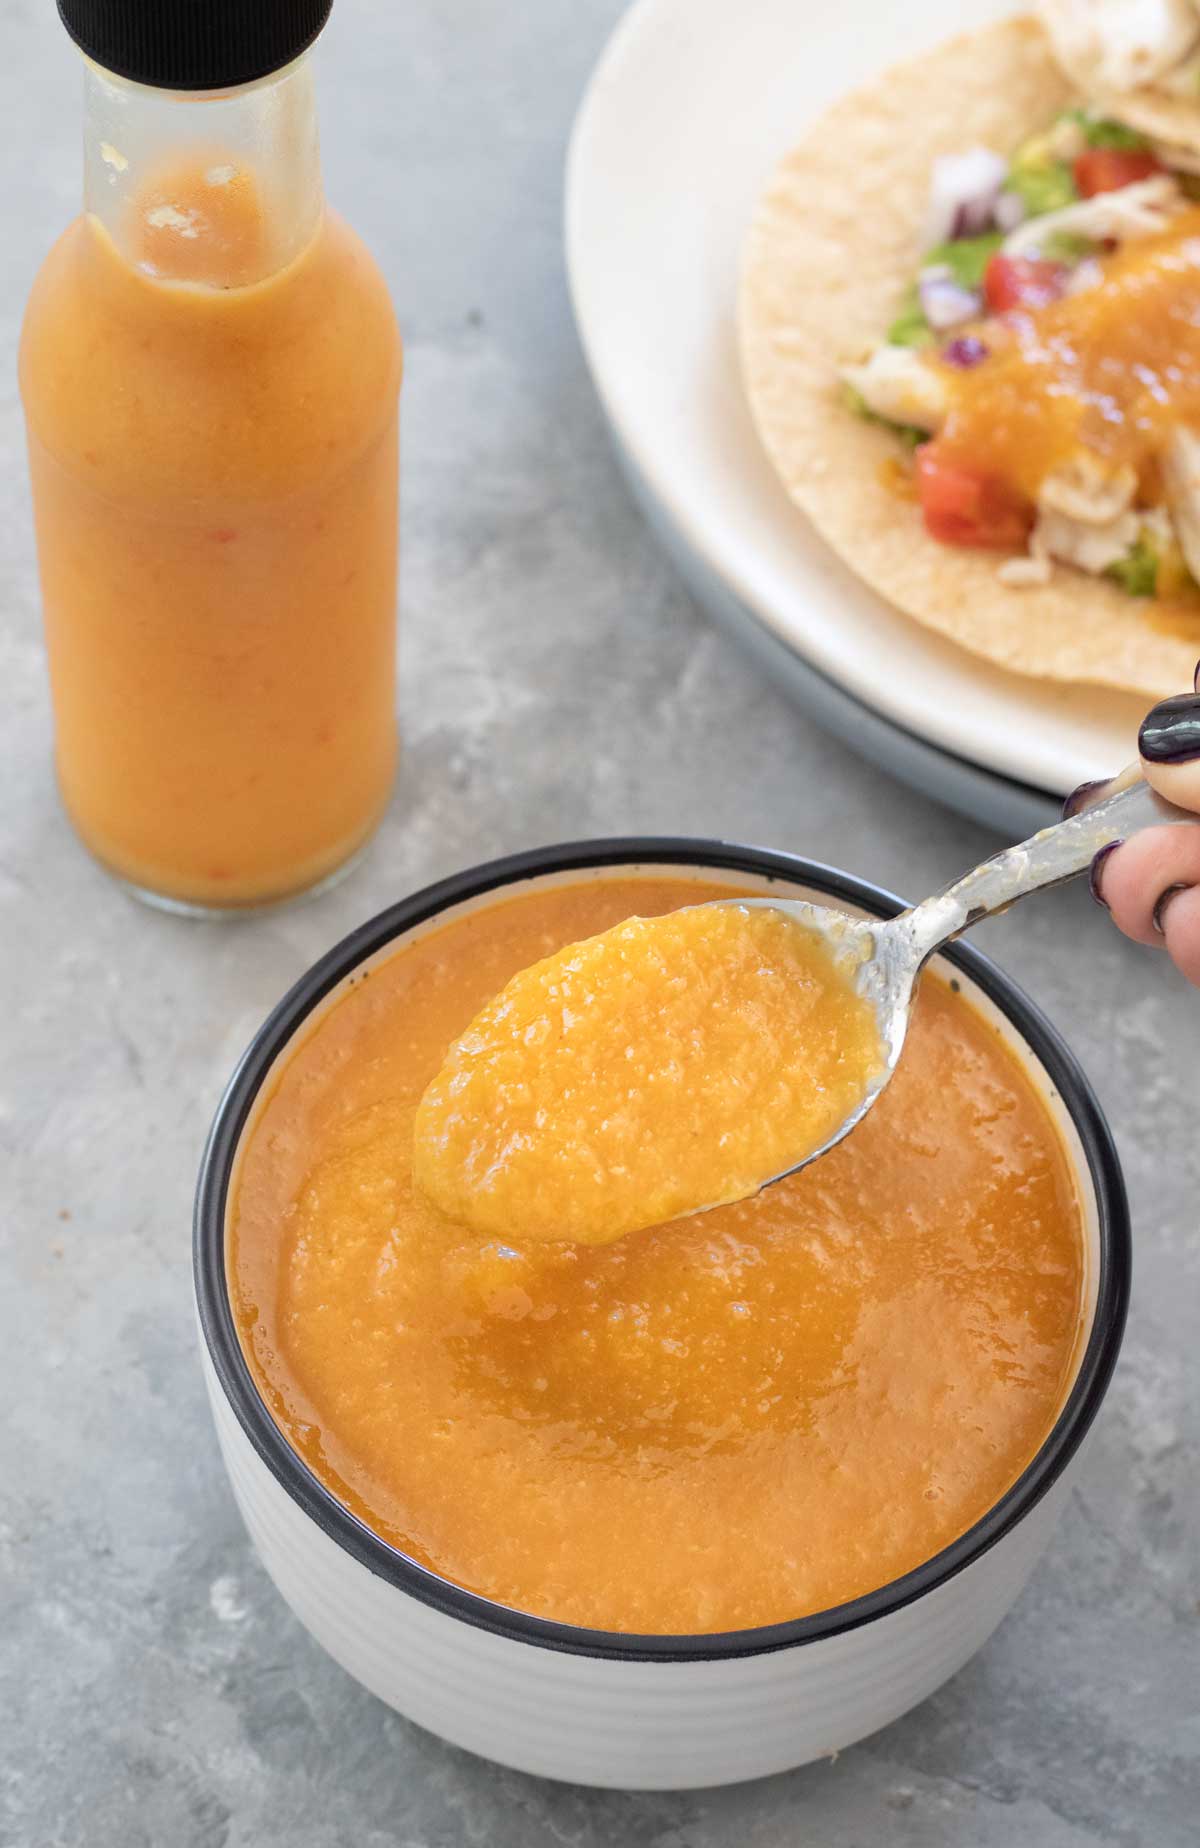 A white bowl with a black rim has been filled with bright orange mango chilli sauce. A white hand has dipped a spoon into the sauce and is holding it slightly above the bowl. The bowl is sitting on a grey table and behind it is a bottle also containing the mango chilli sauce, and a plate of tacos. 